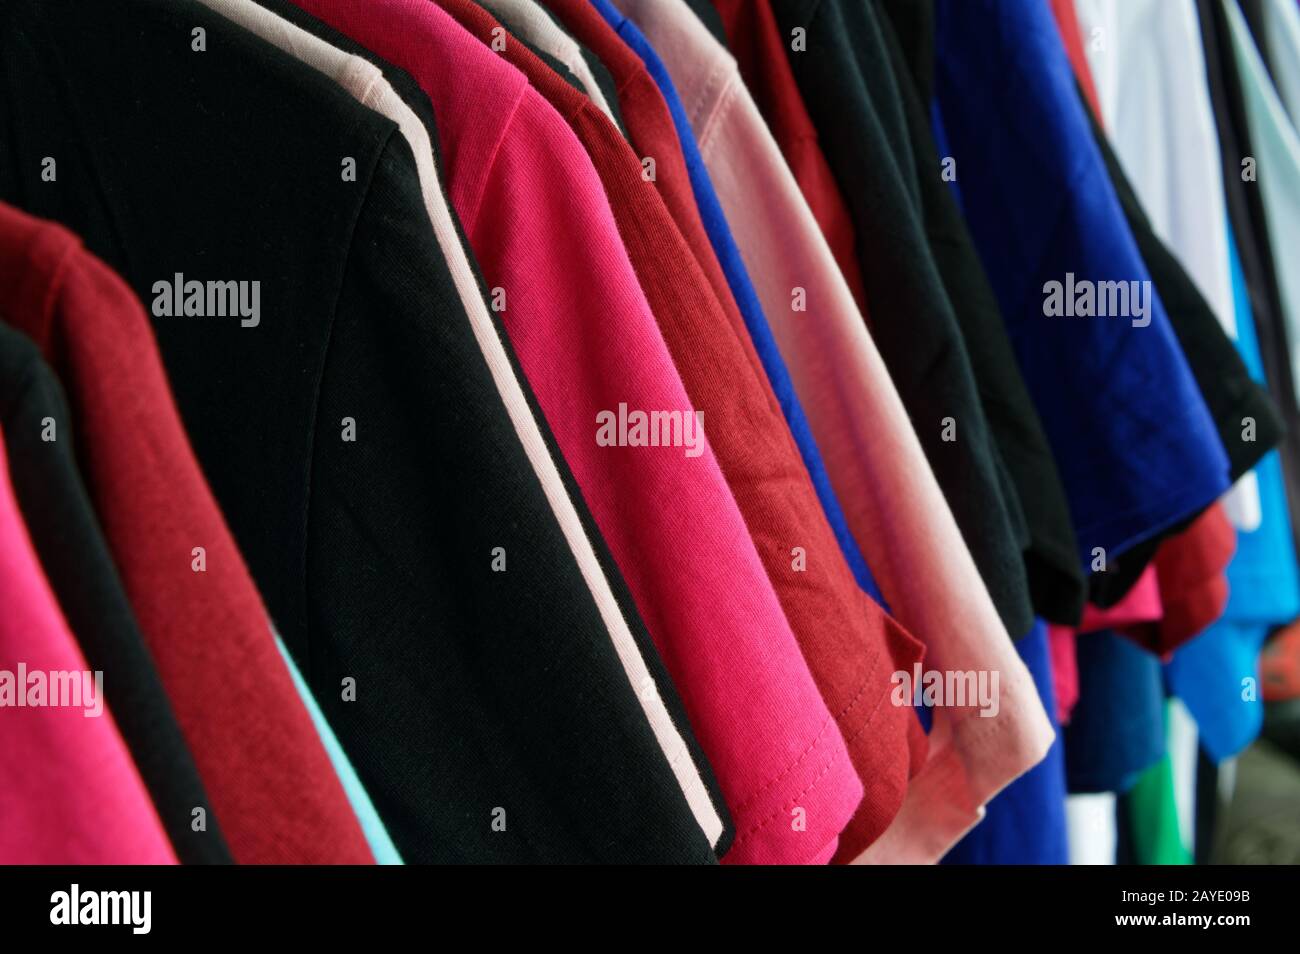 Different coloured shirts hang in a row Stock Photo